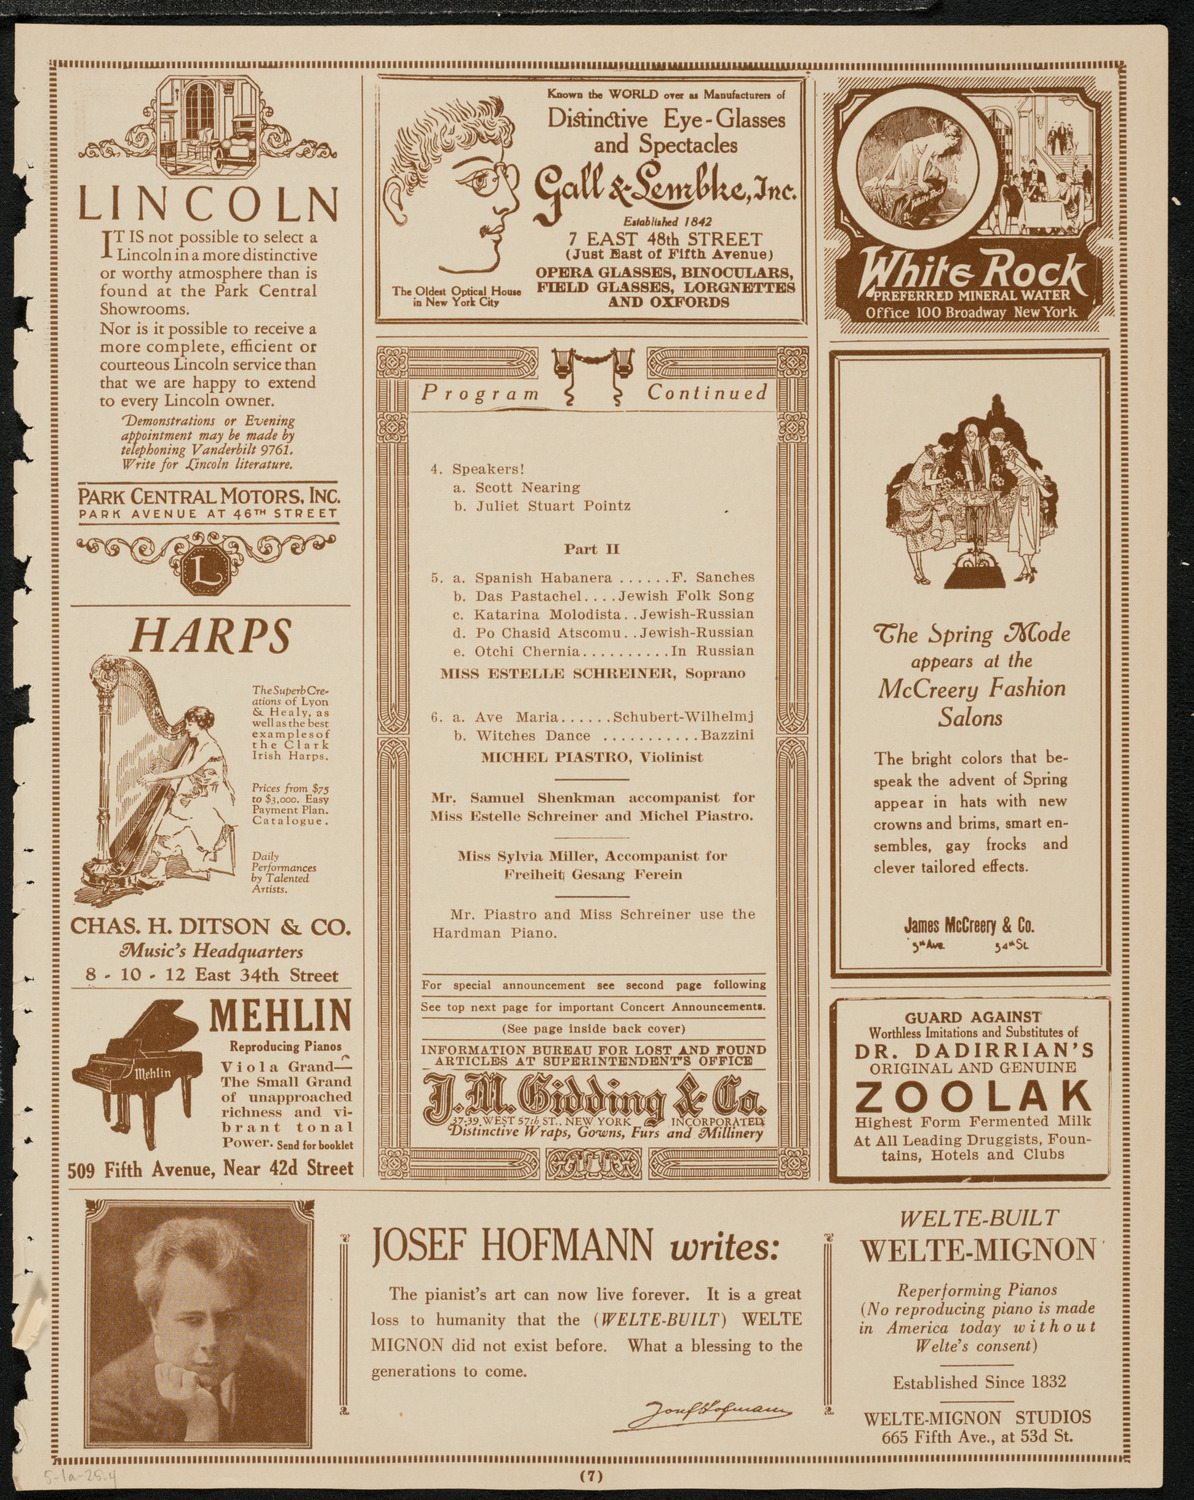 May Day Festival, May 1, 1925, program page 7